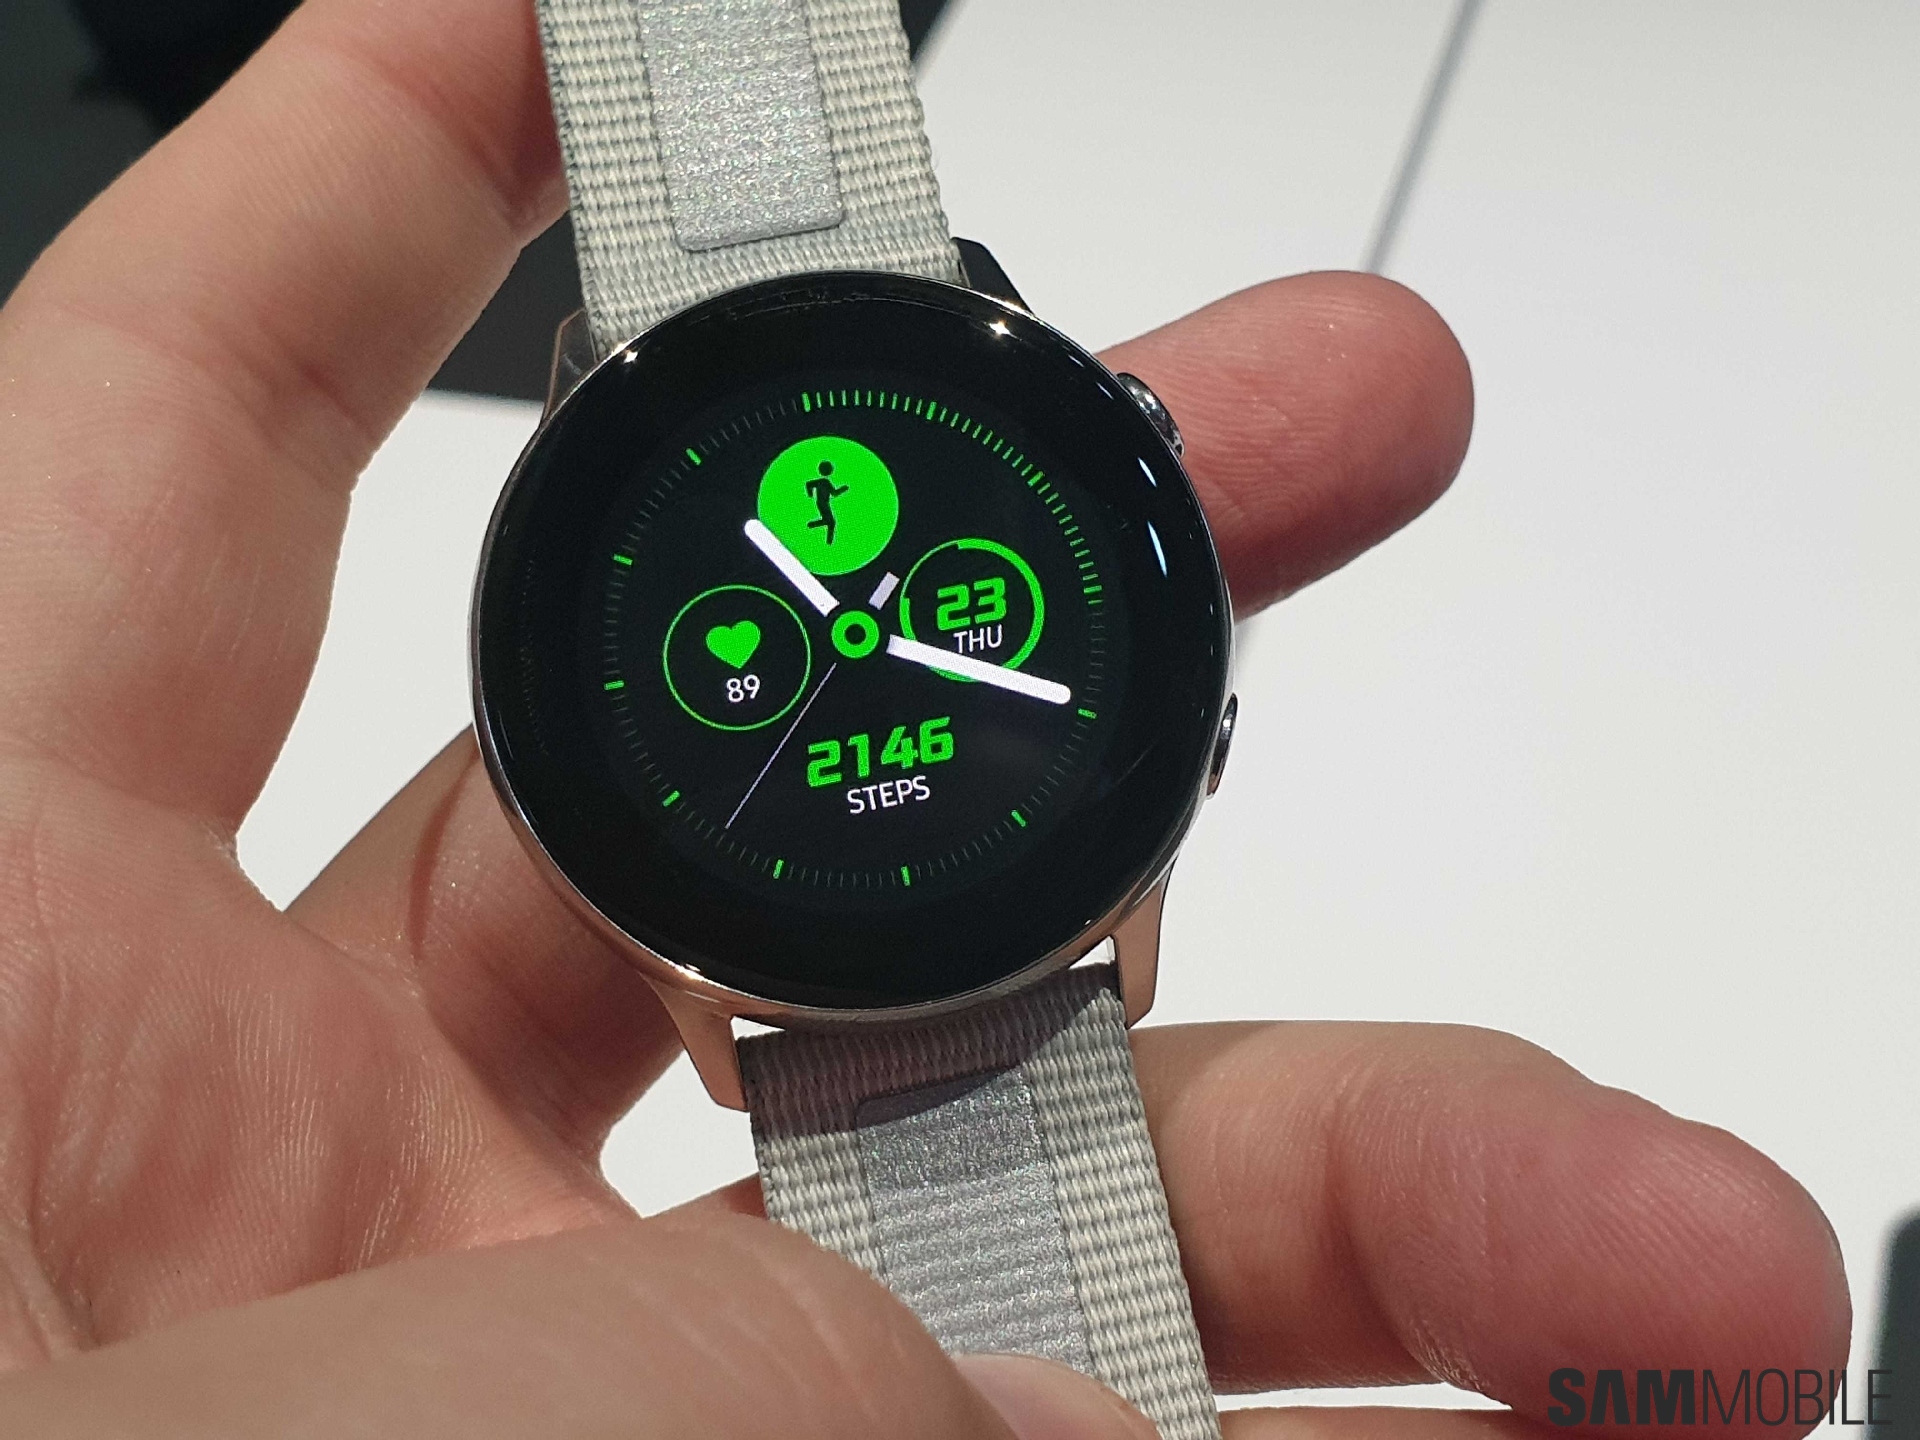 Galaxy Watch Active launched in Vietnam, sales start April 10 - SamMobile